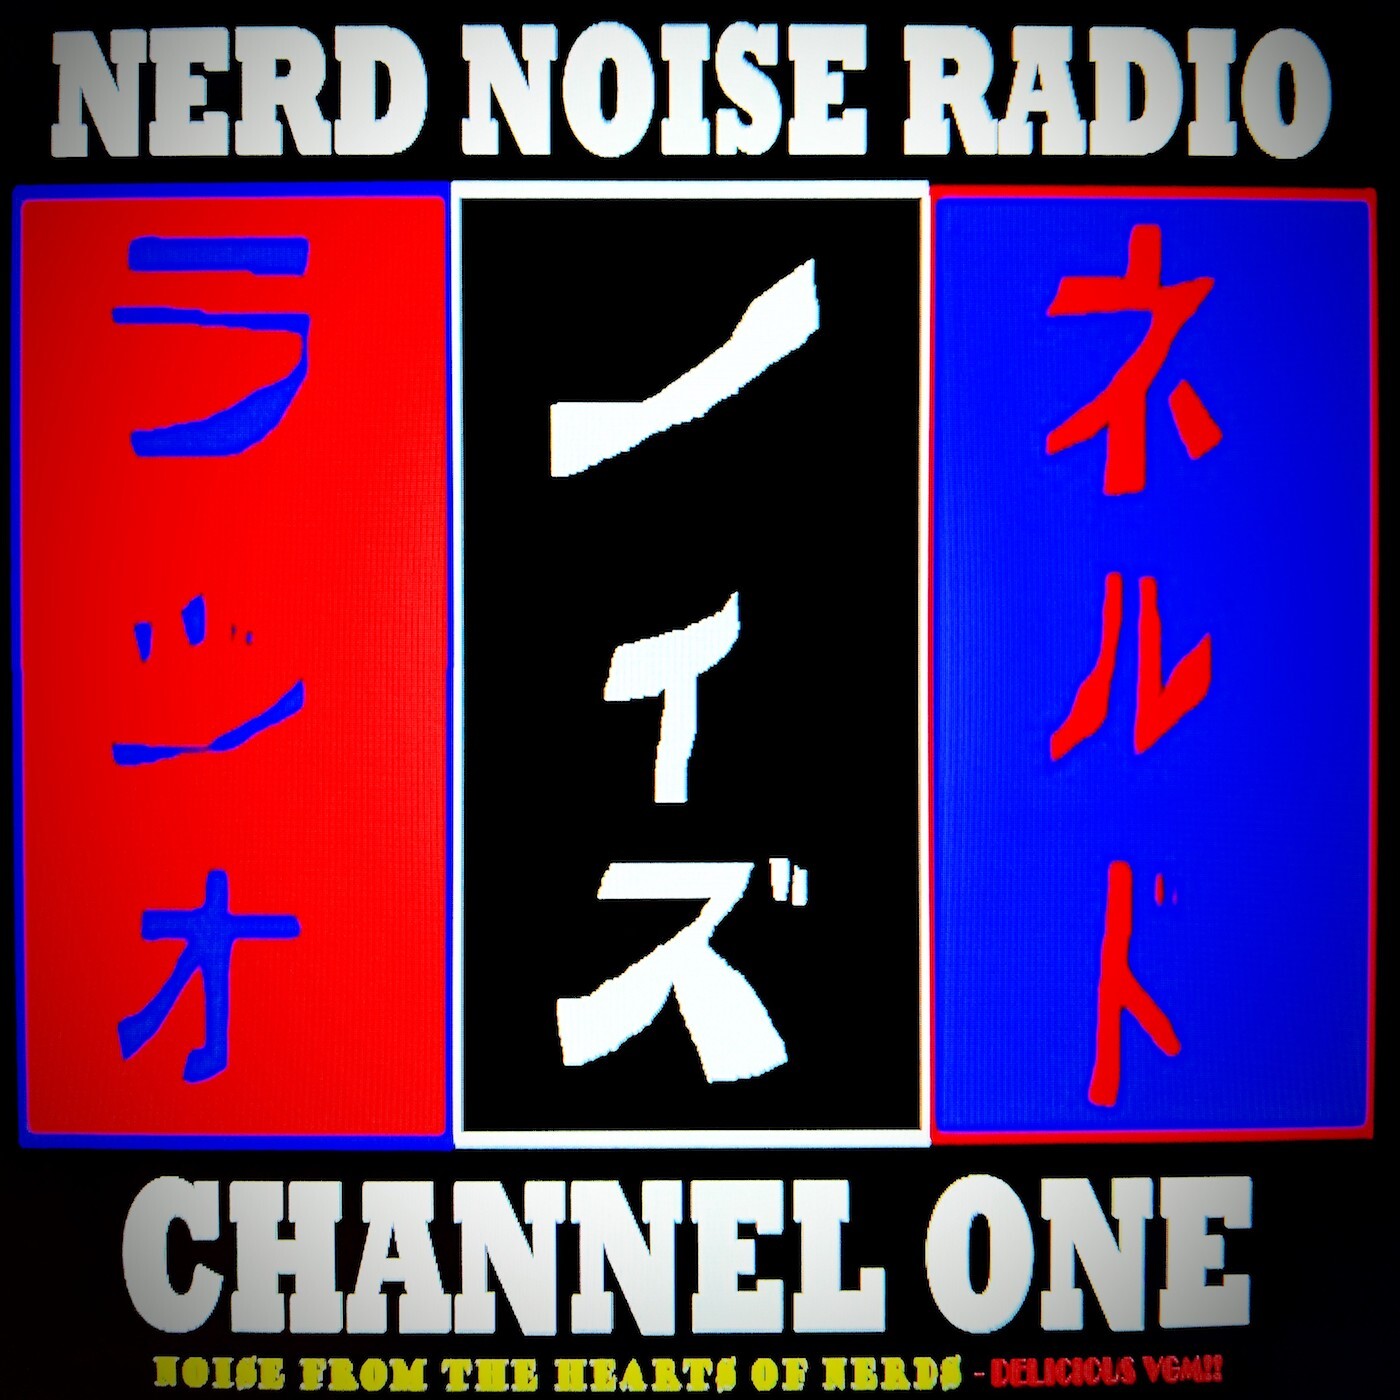 Nerd Noise Radio - Channel 1: ”Noise from the Hearts of Nerds” Podcast - Episode 25 - “C1E25: The Best of 2017”